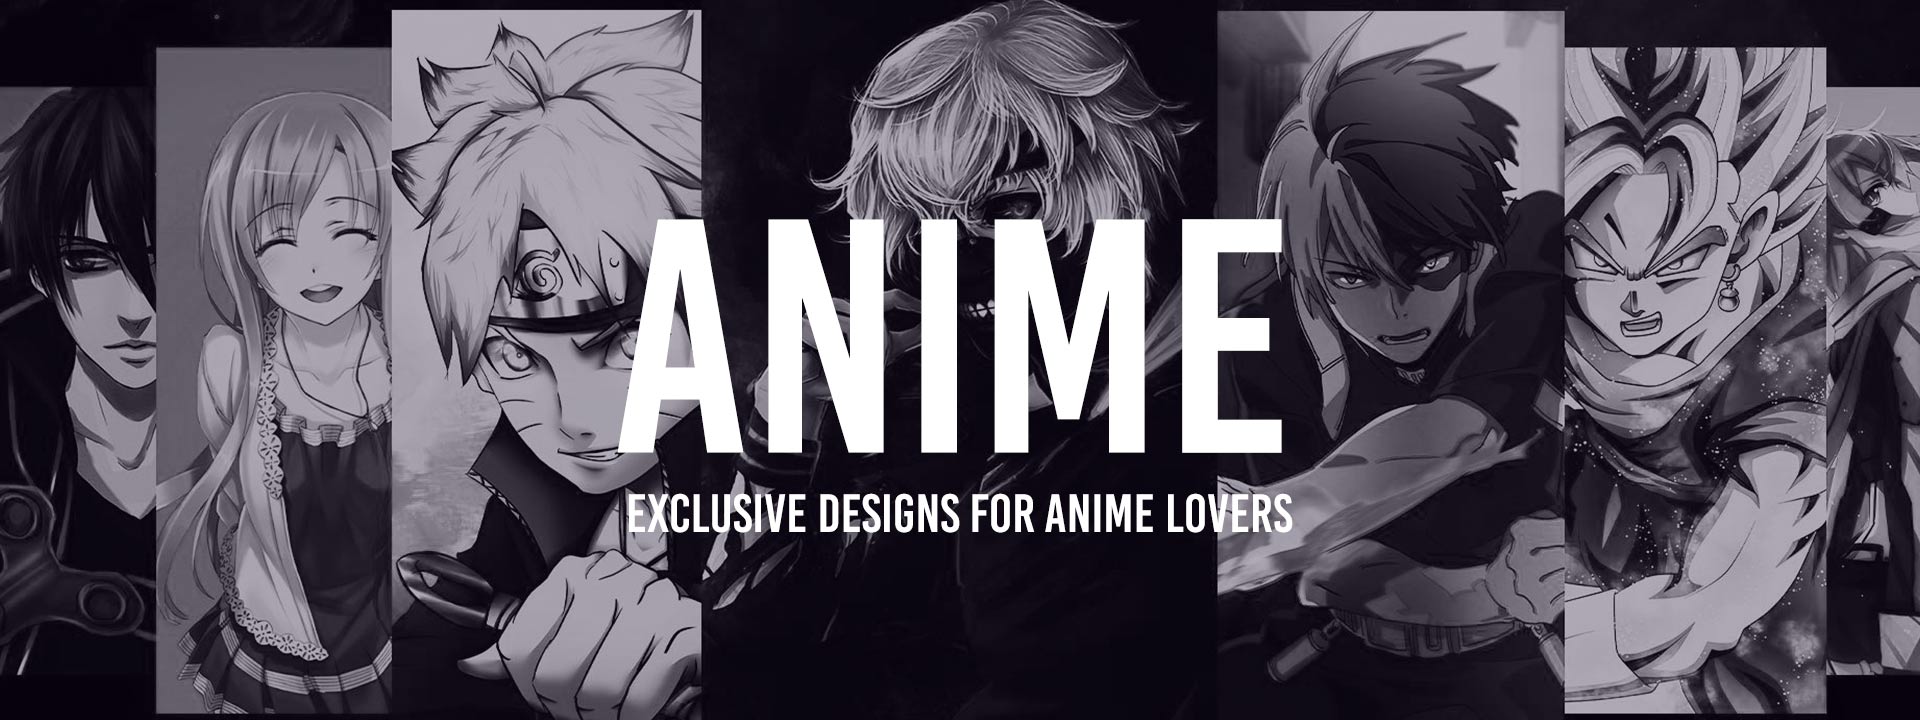 anime cover pic